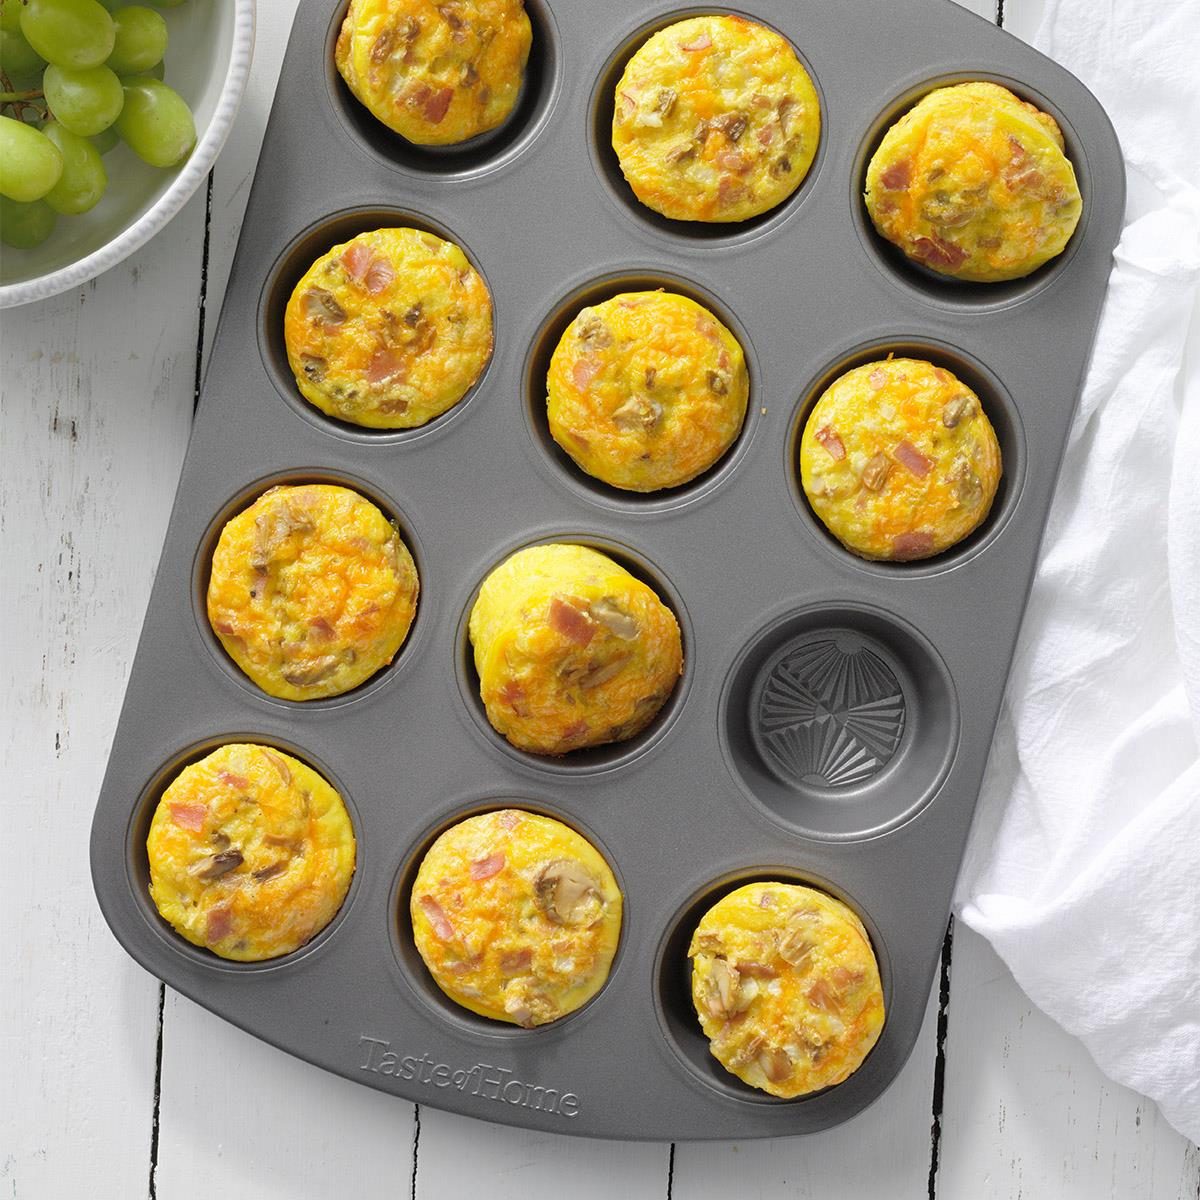 12 muffin tin recipes to make this year